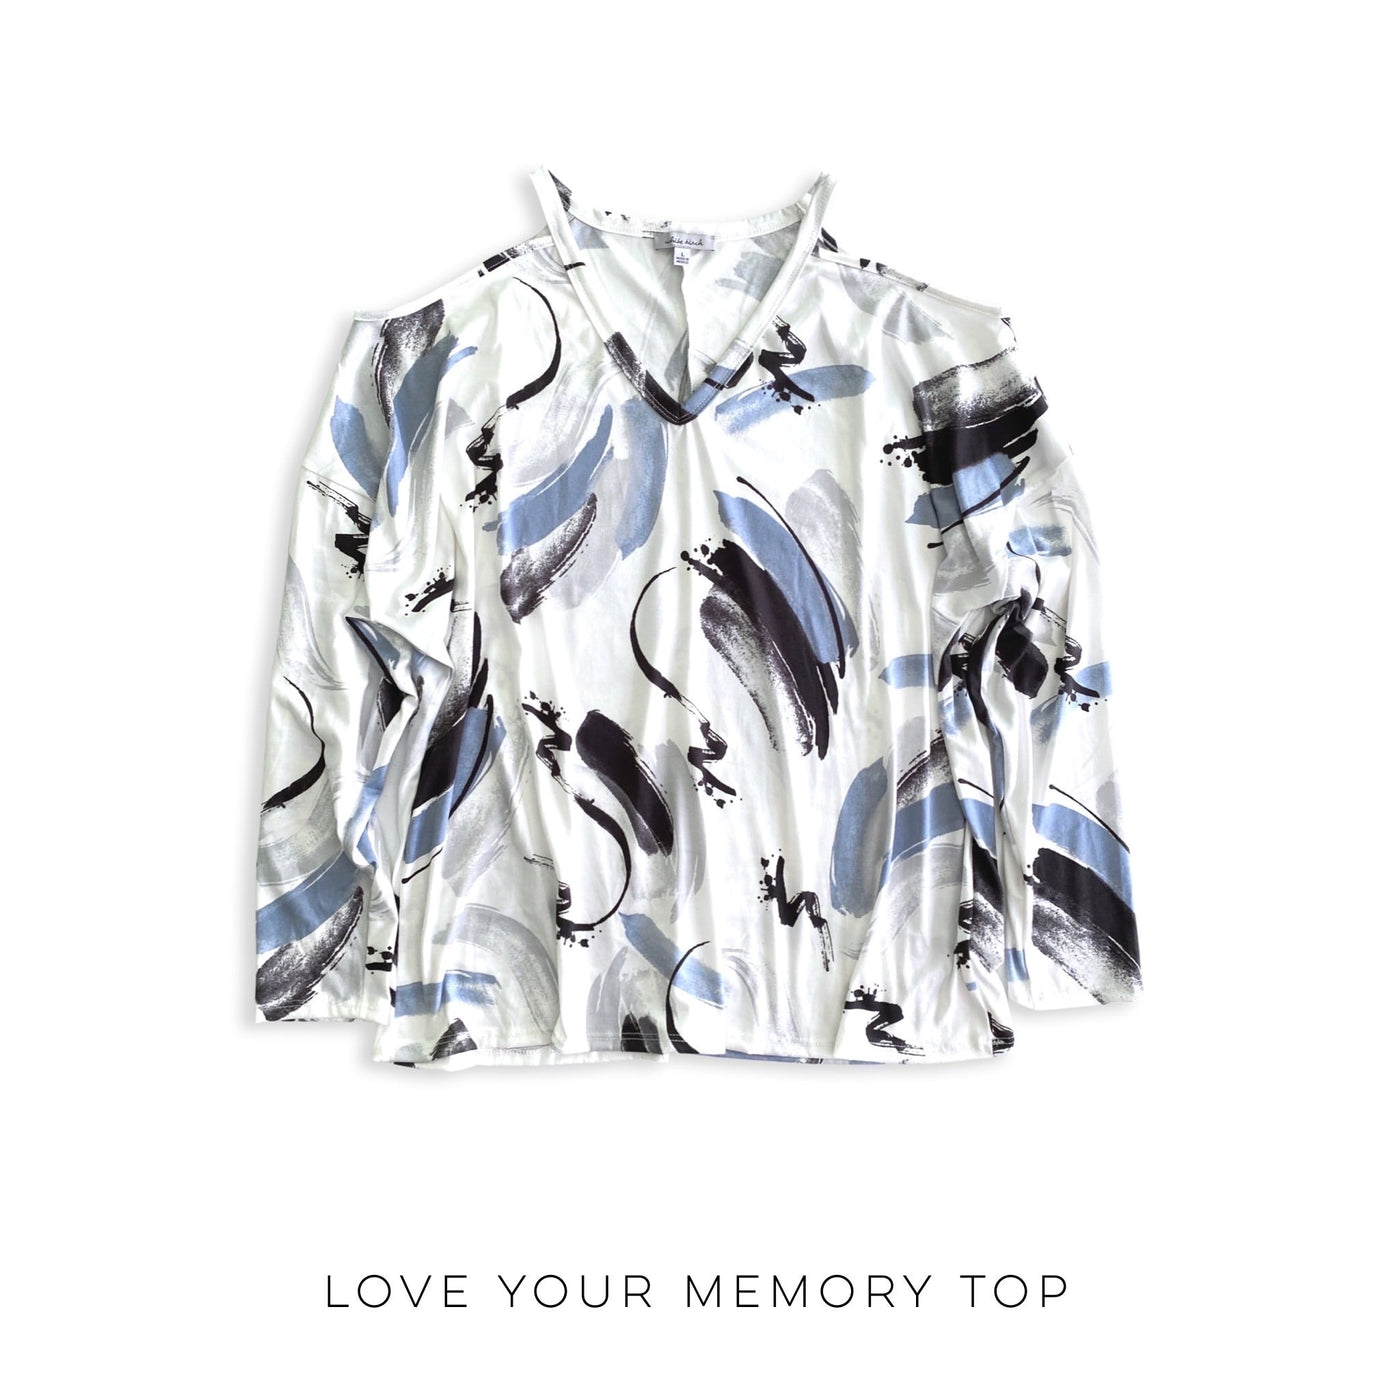 Love Your Memory Top - Copper + Rose